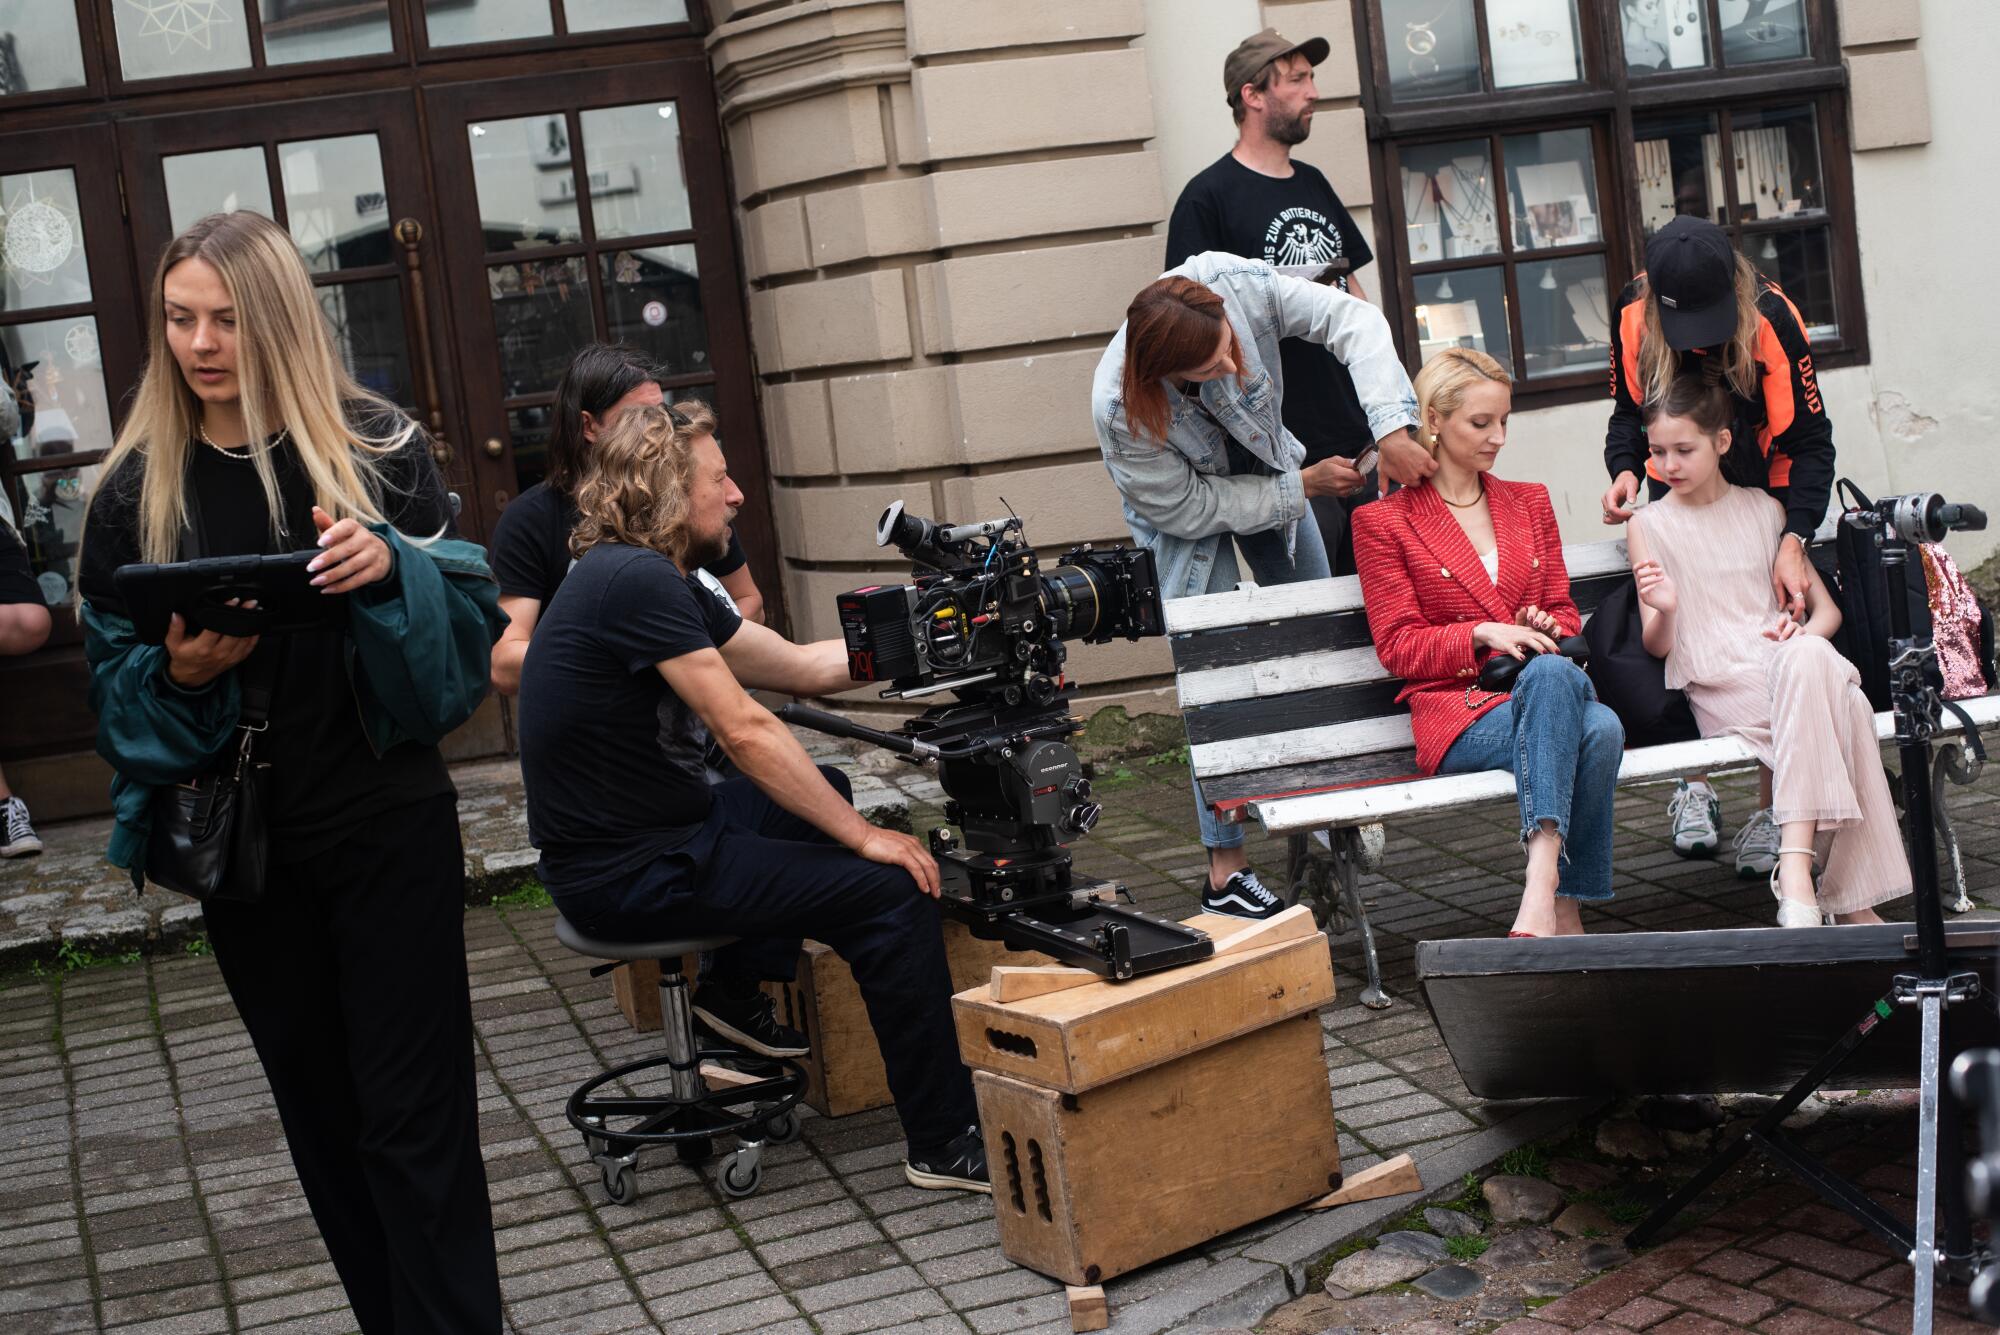 A cameraman sits next to a group of actors and others between takes